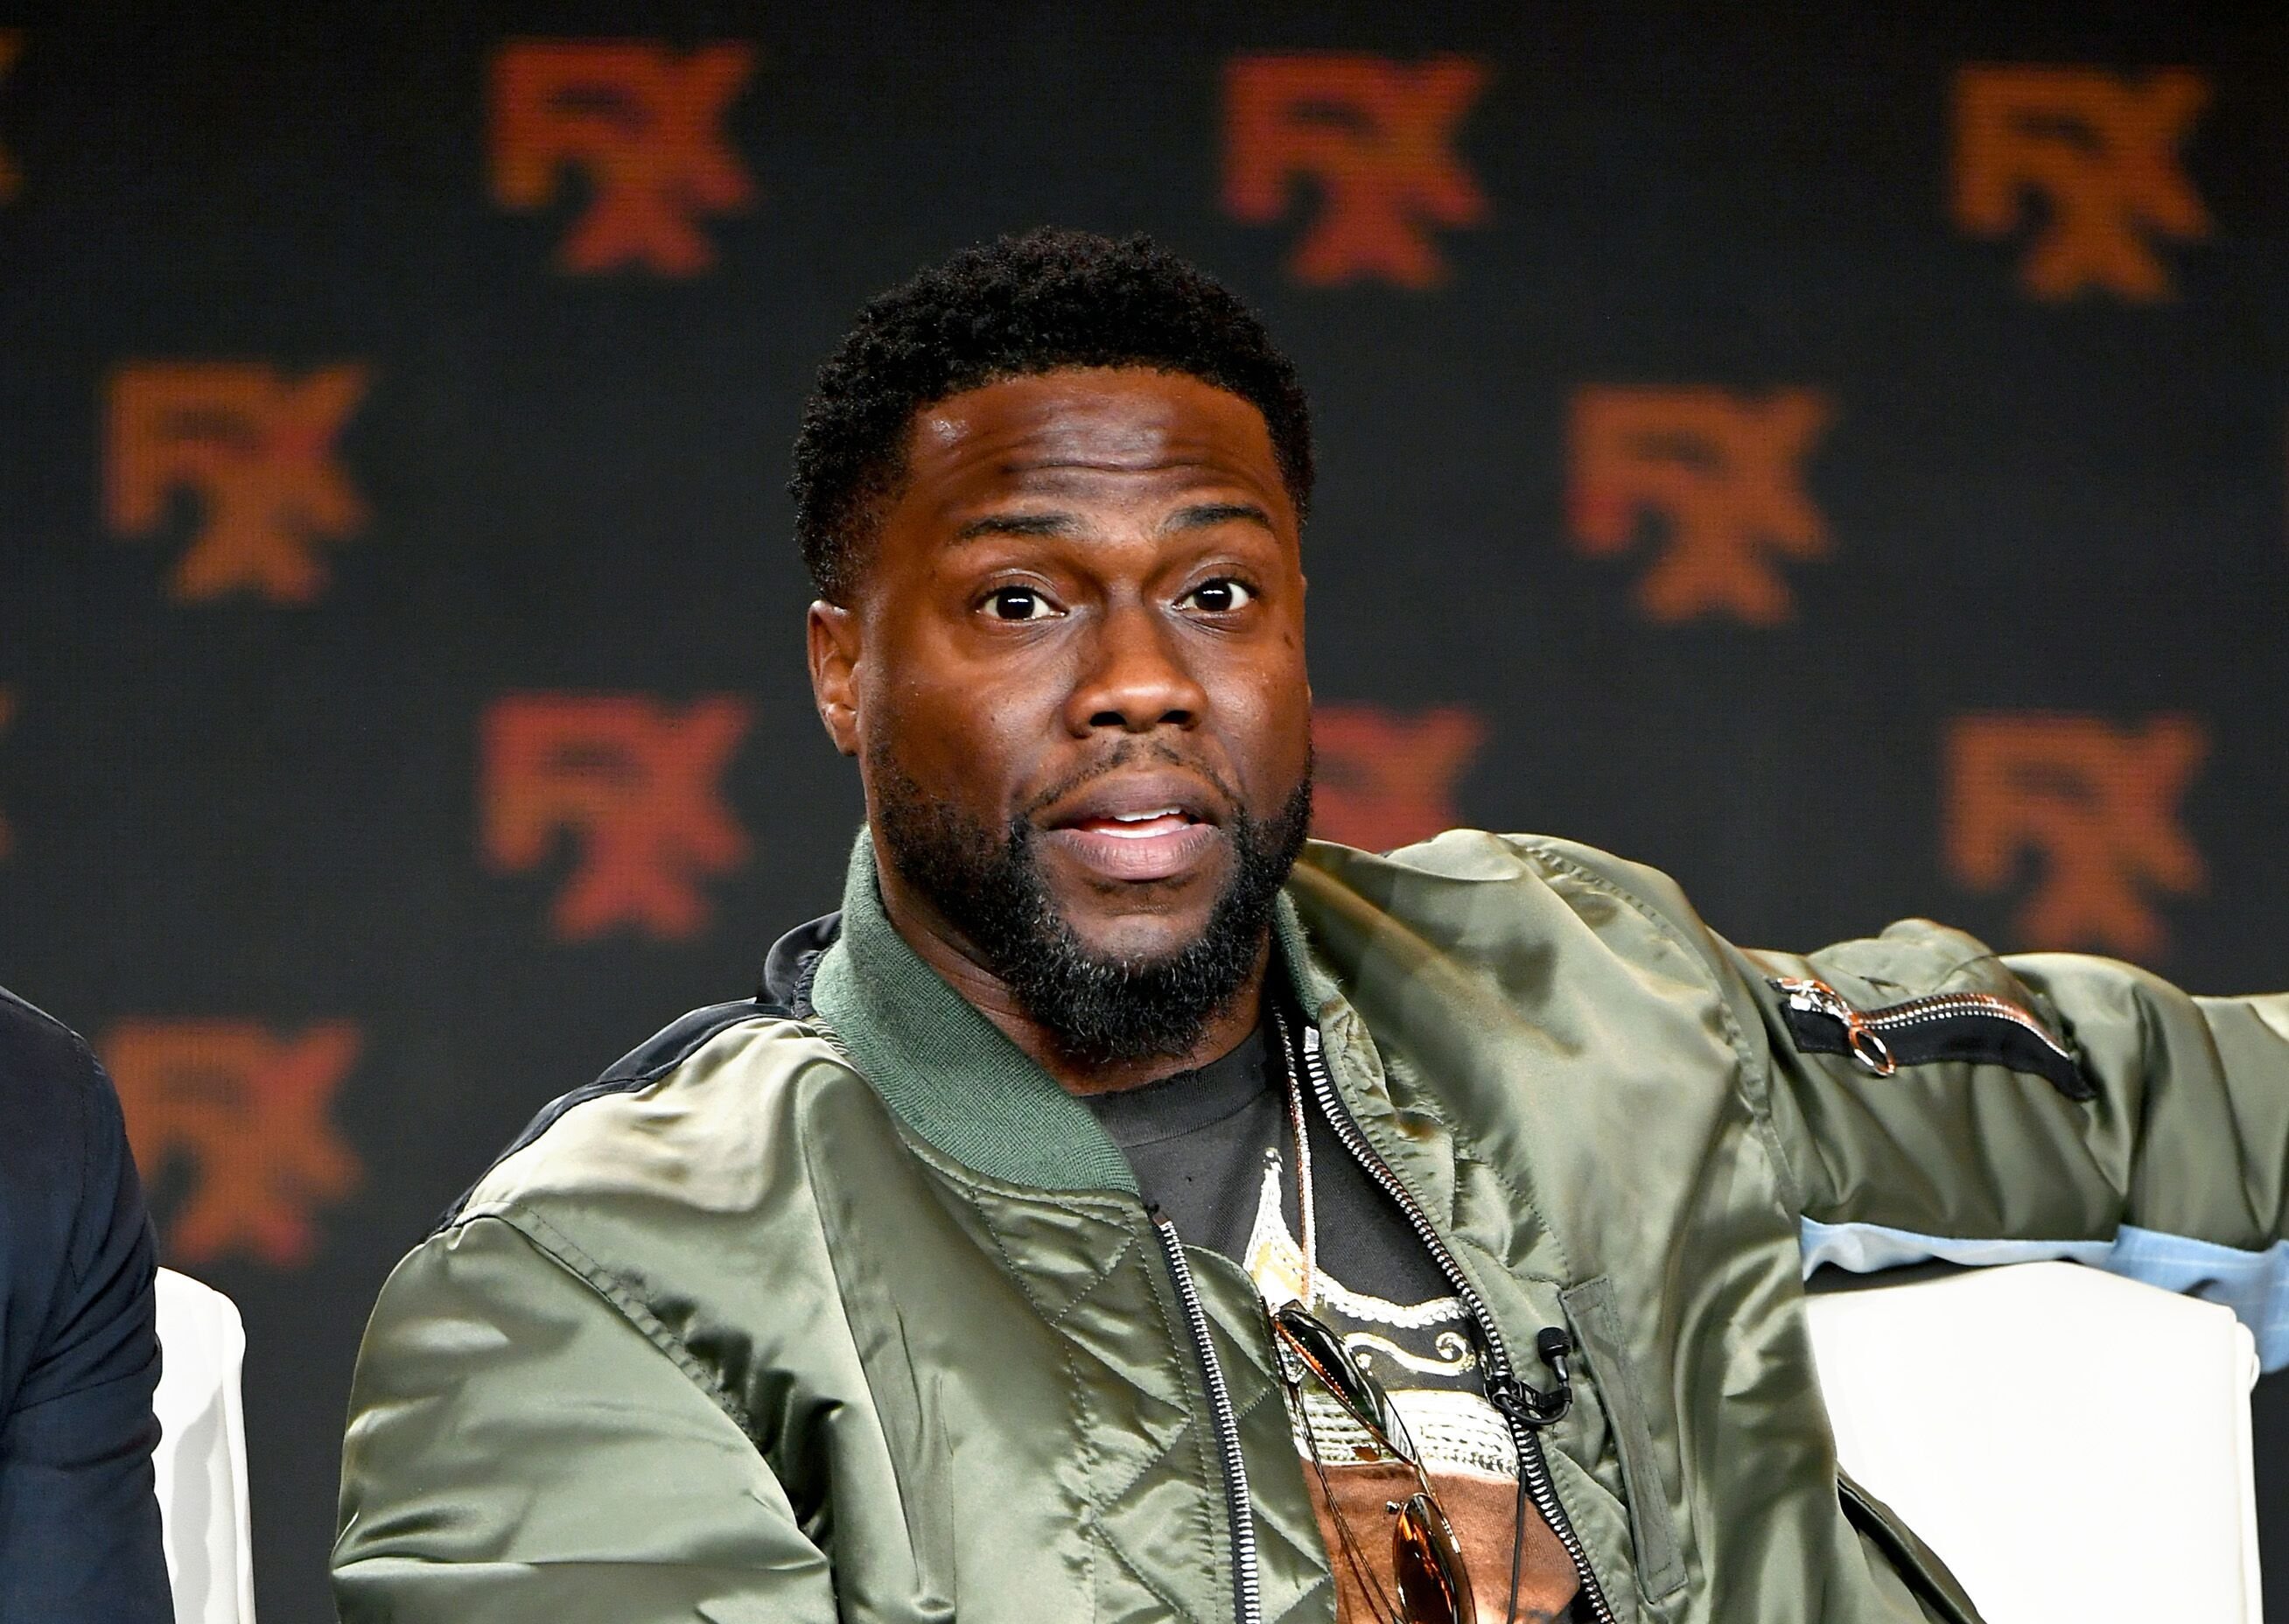  Kevin Hart at the FX segment of the 2020 Winter TCA Tour in Pasadena in January 2020 | Source: Getty Images